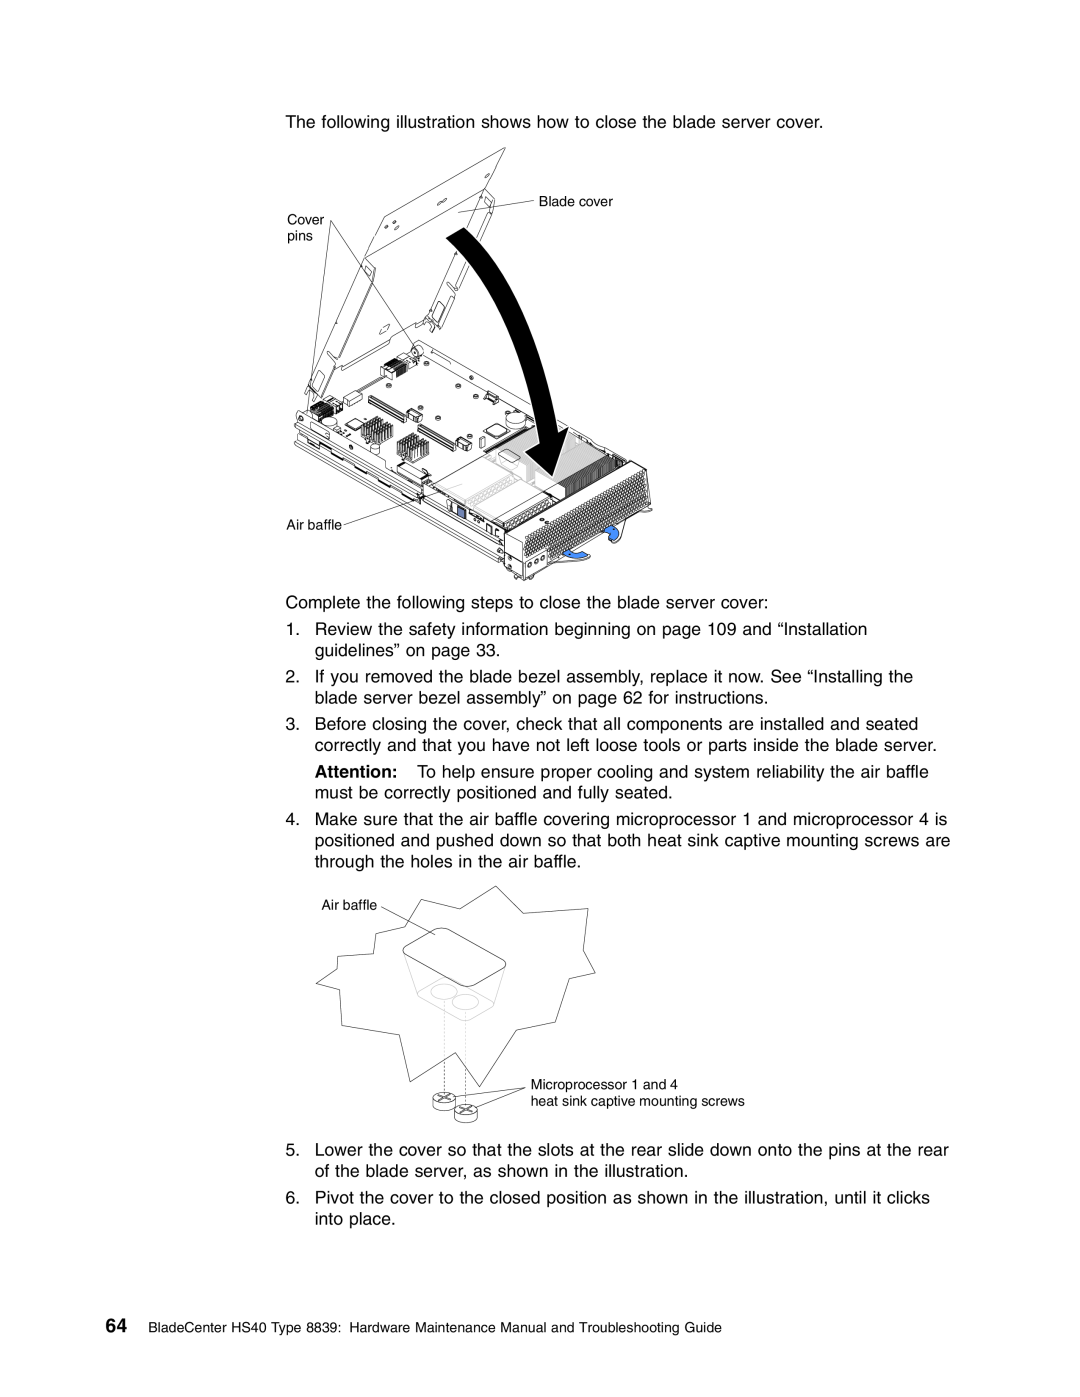 IBM HS40 manual The following illustration shows how to close the blade server cover 